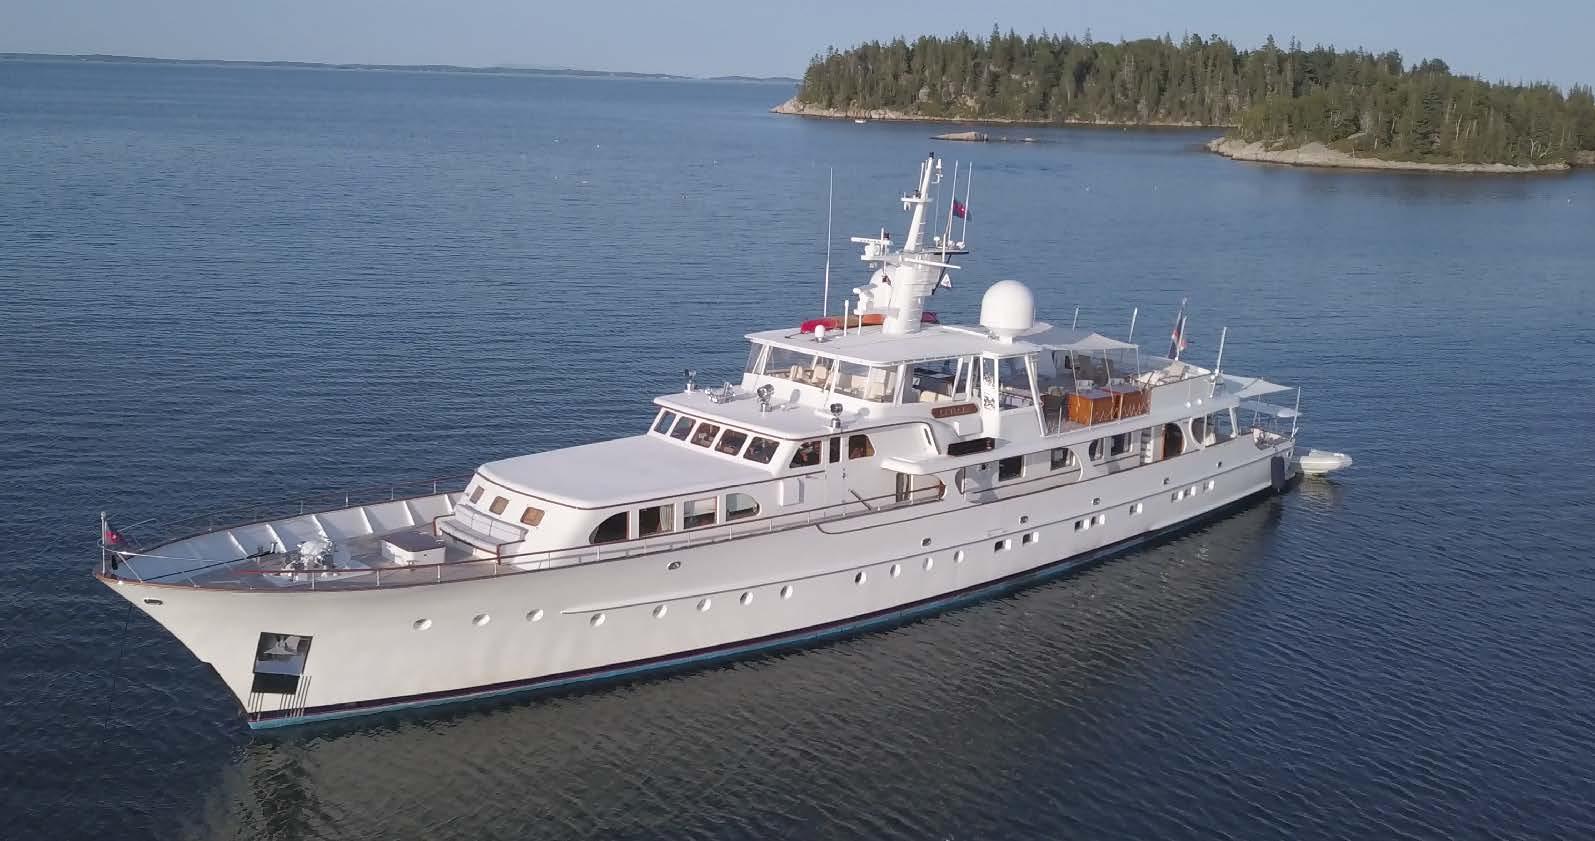 Feadship Yachts for Sale - Feadship Yachts Prices - TWW Yachts